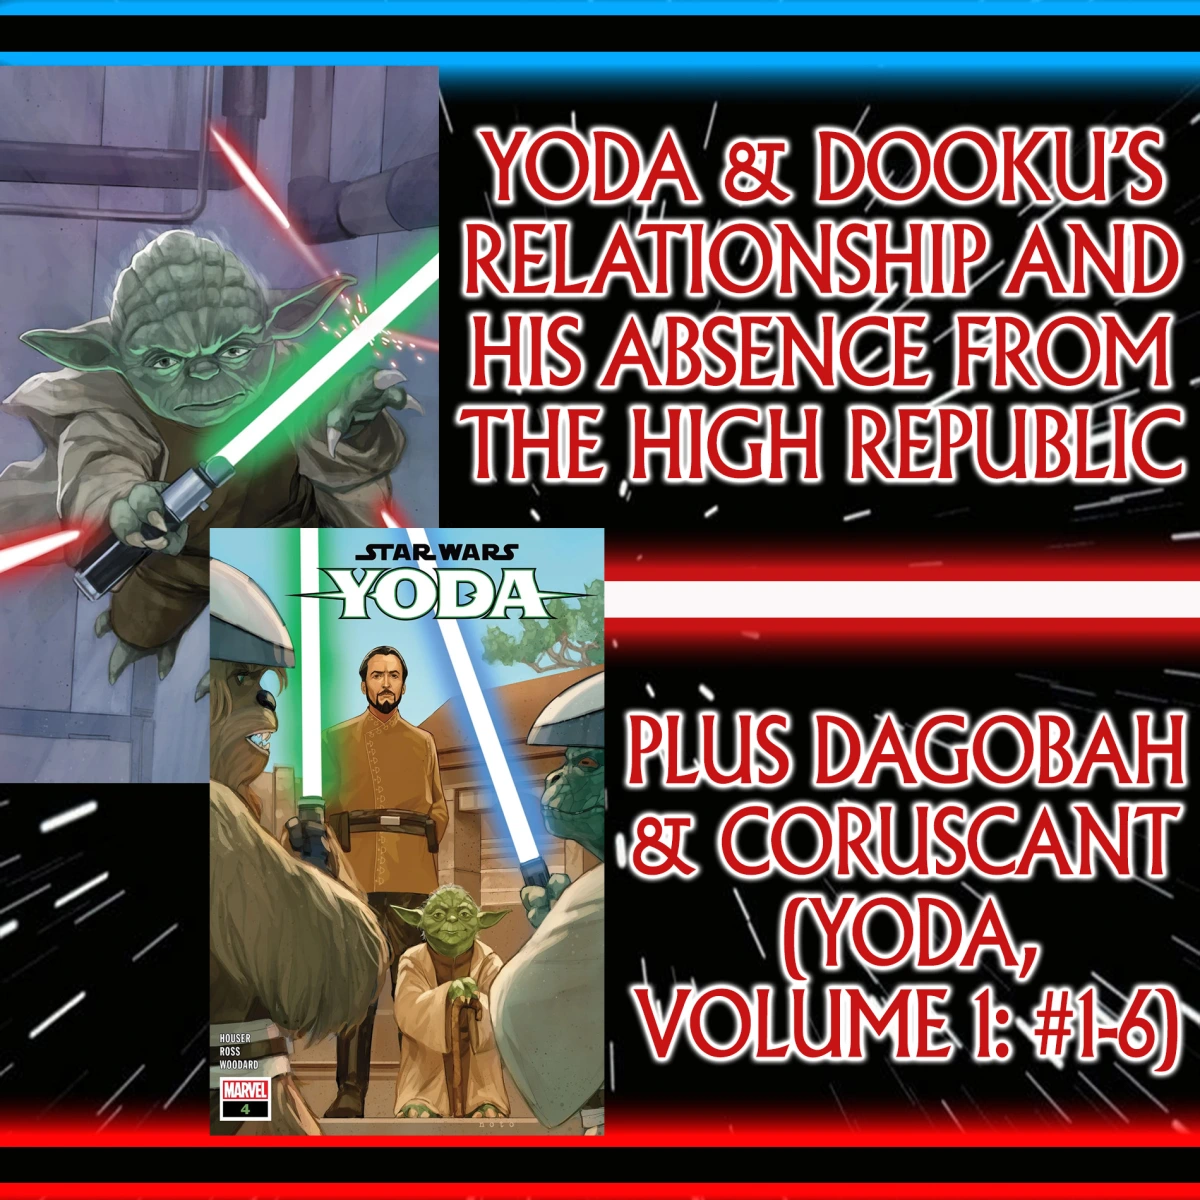 Star Wars: Comics In Canon – Yoda & Dooku’s Relationship And Yoda’s Absence During The High Republic, Plus Dagobah & Coruscant (Yoda Volume 1: #1-6) – Ep 131